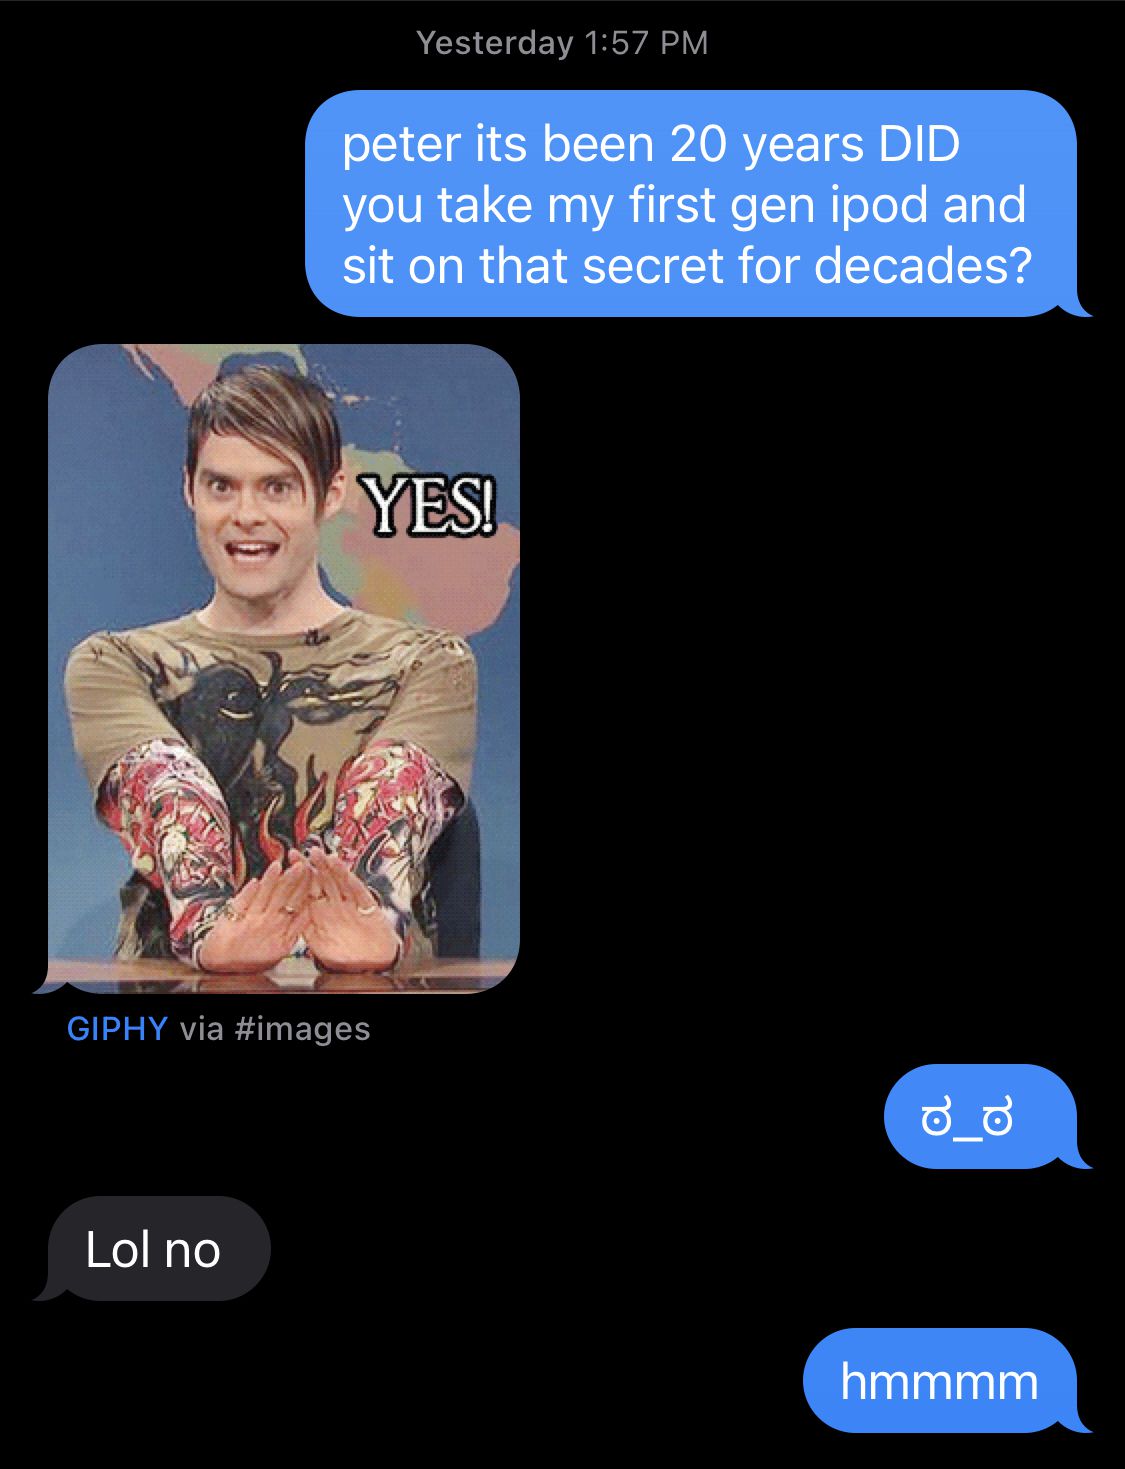  “Peter, it’s been 20 years, did you instrumentality     my archetypal  gen iPod and beryllium   connected  that concealed  for decades?” Peter responds with an SNL gif of Stefon saying “Yes,” past    aboriginal    replies “lol no.”